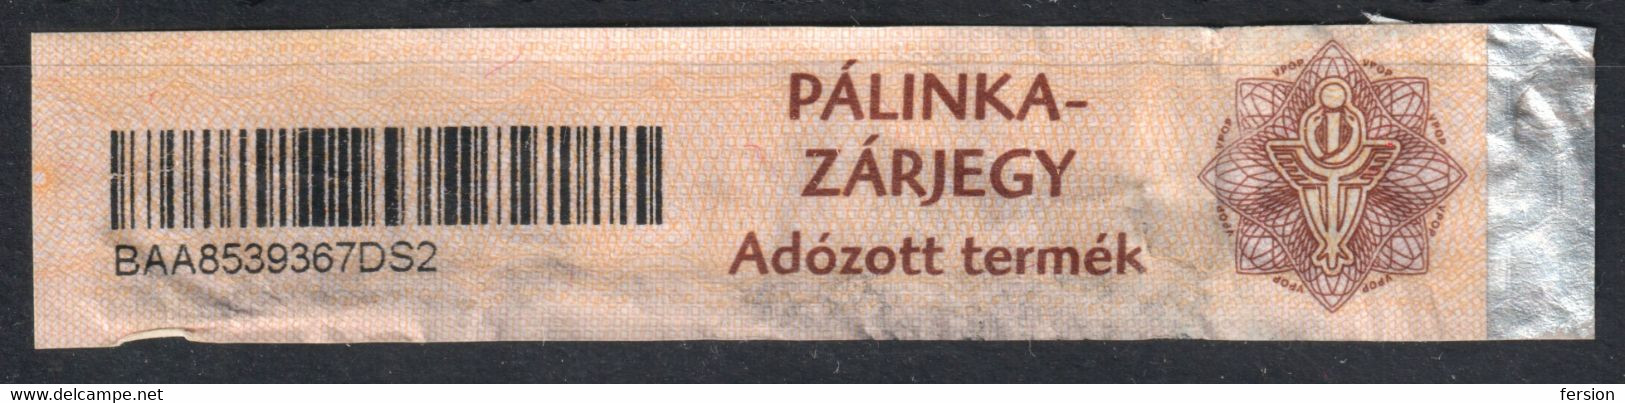 Hungary - Distilled Beverage Alcohol Drink - PÁLINKA / Fiscal Tax Seal / Revenue CUSTOMS - 2000 - Used - Steuermarken